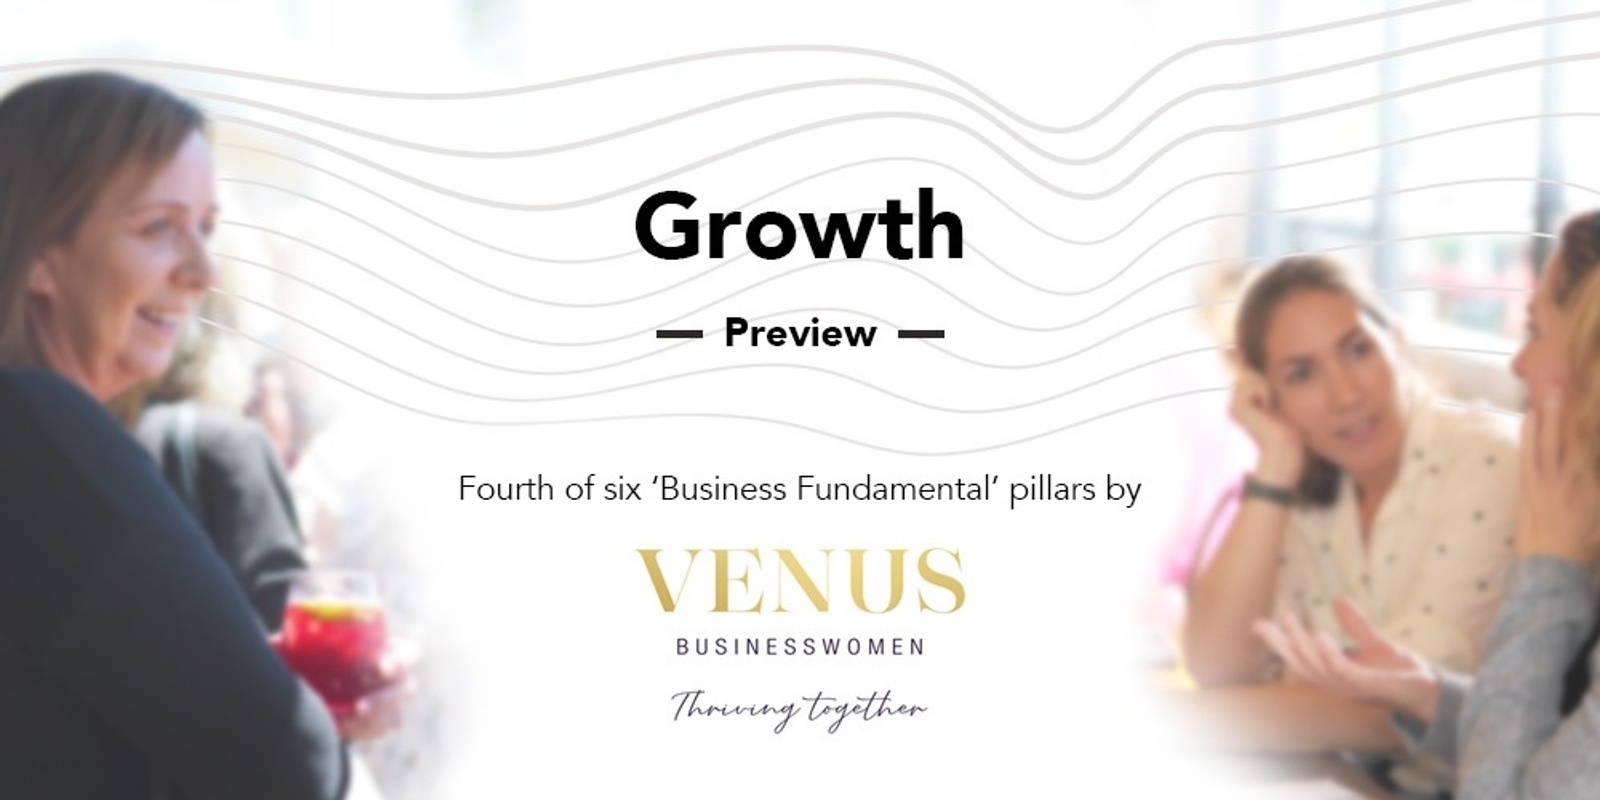 Banner image for Growth Preview by Venus Businesswomen - 1st June 2021